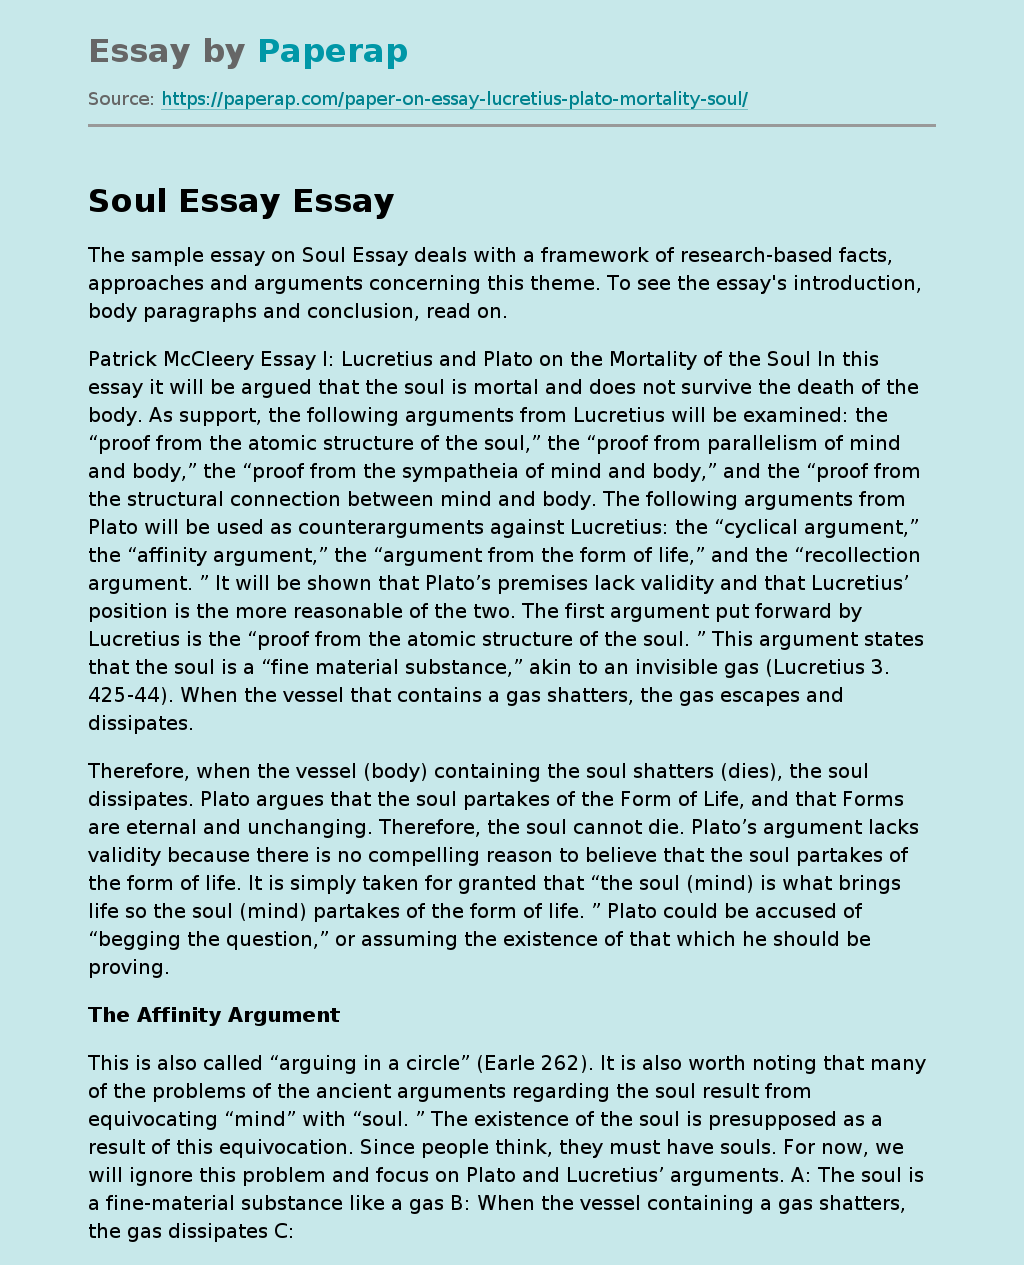 Soul Essay: Research-Based Approaches